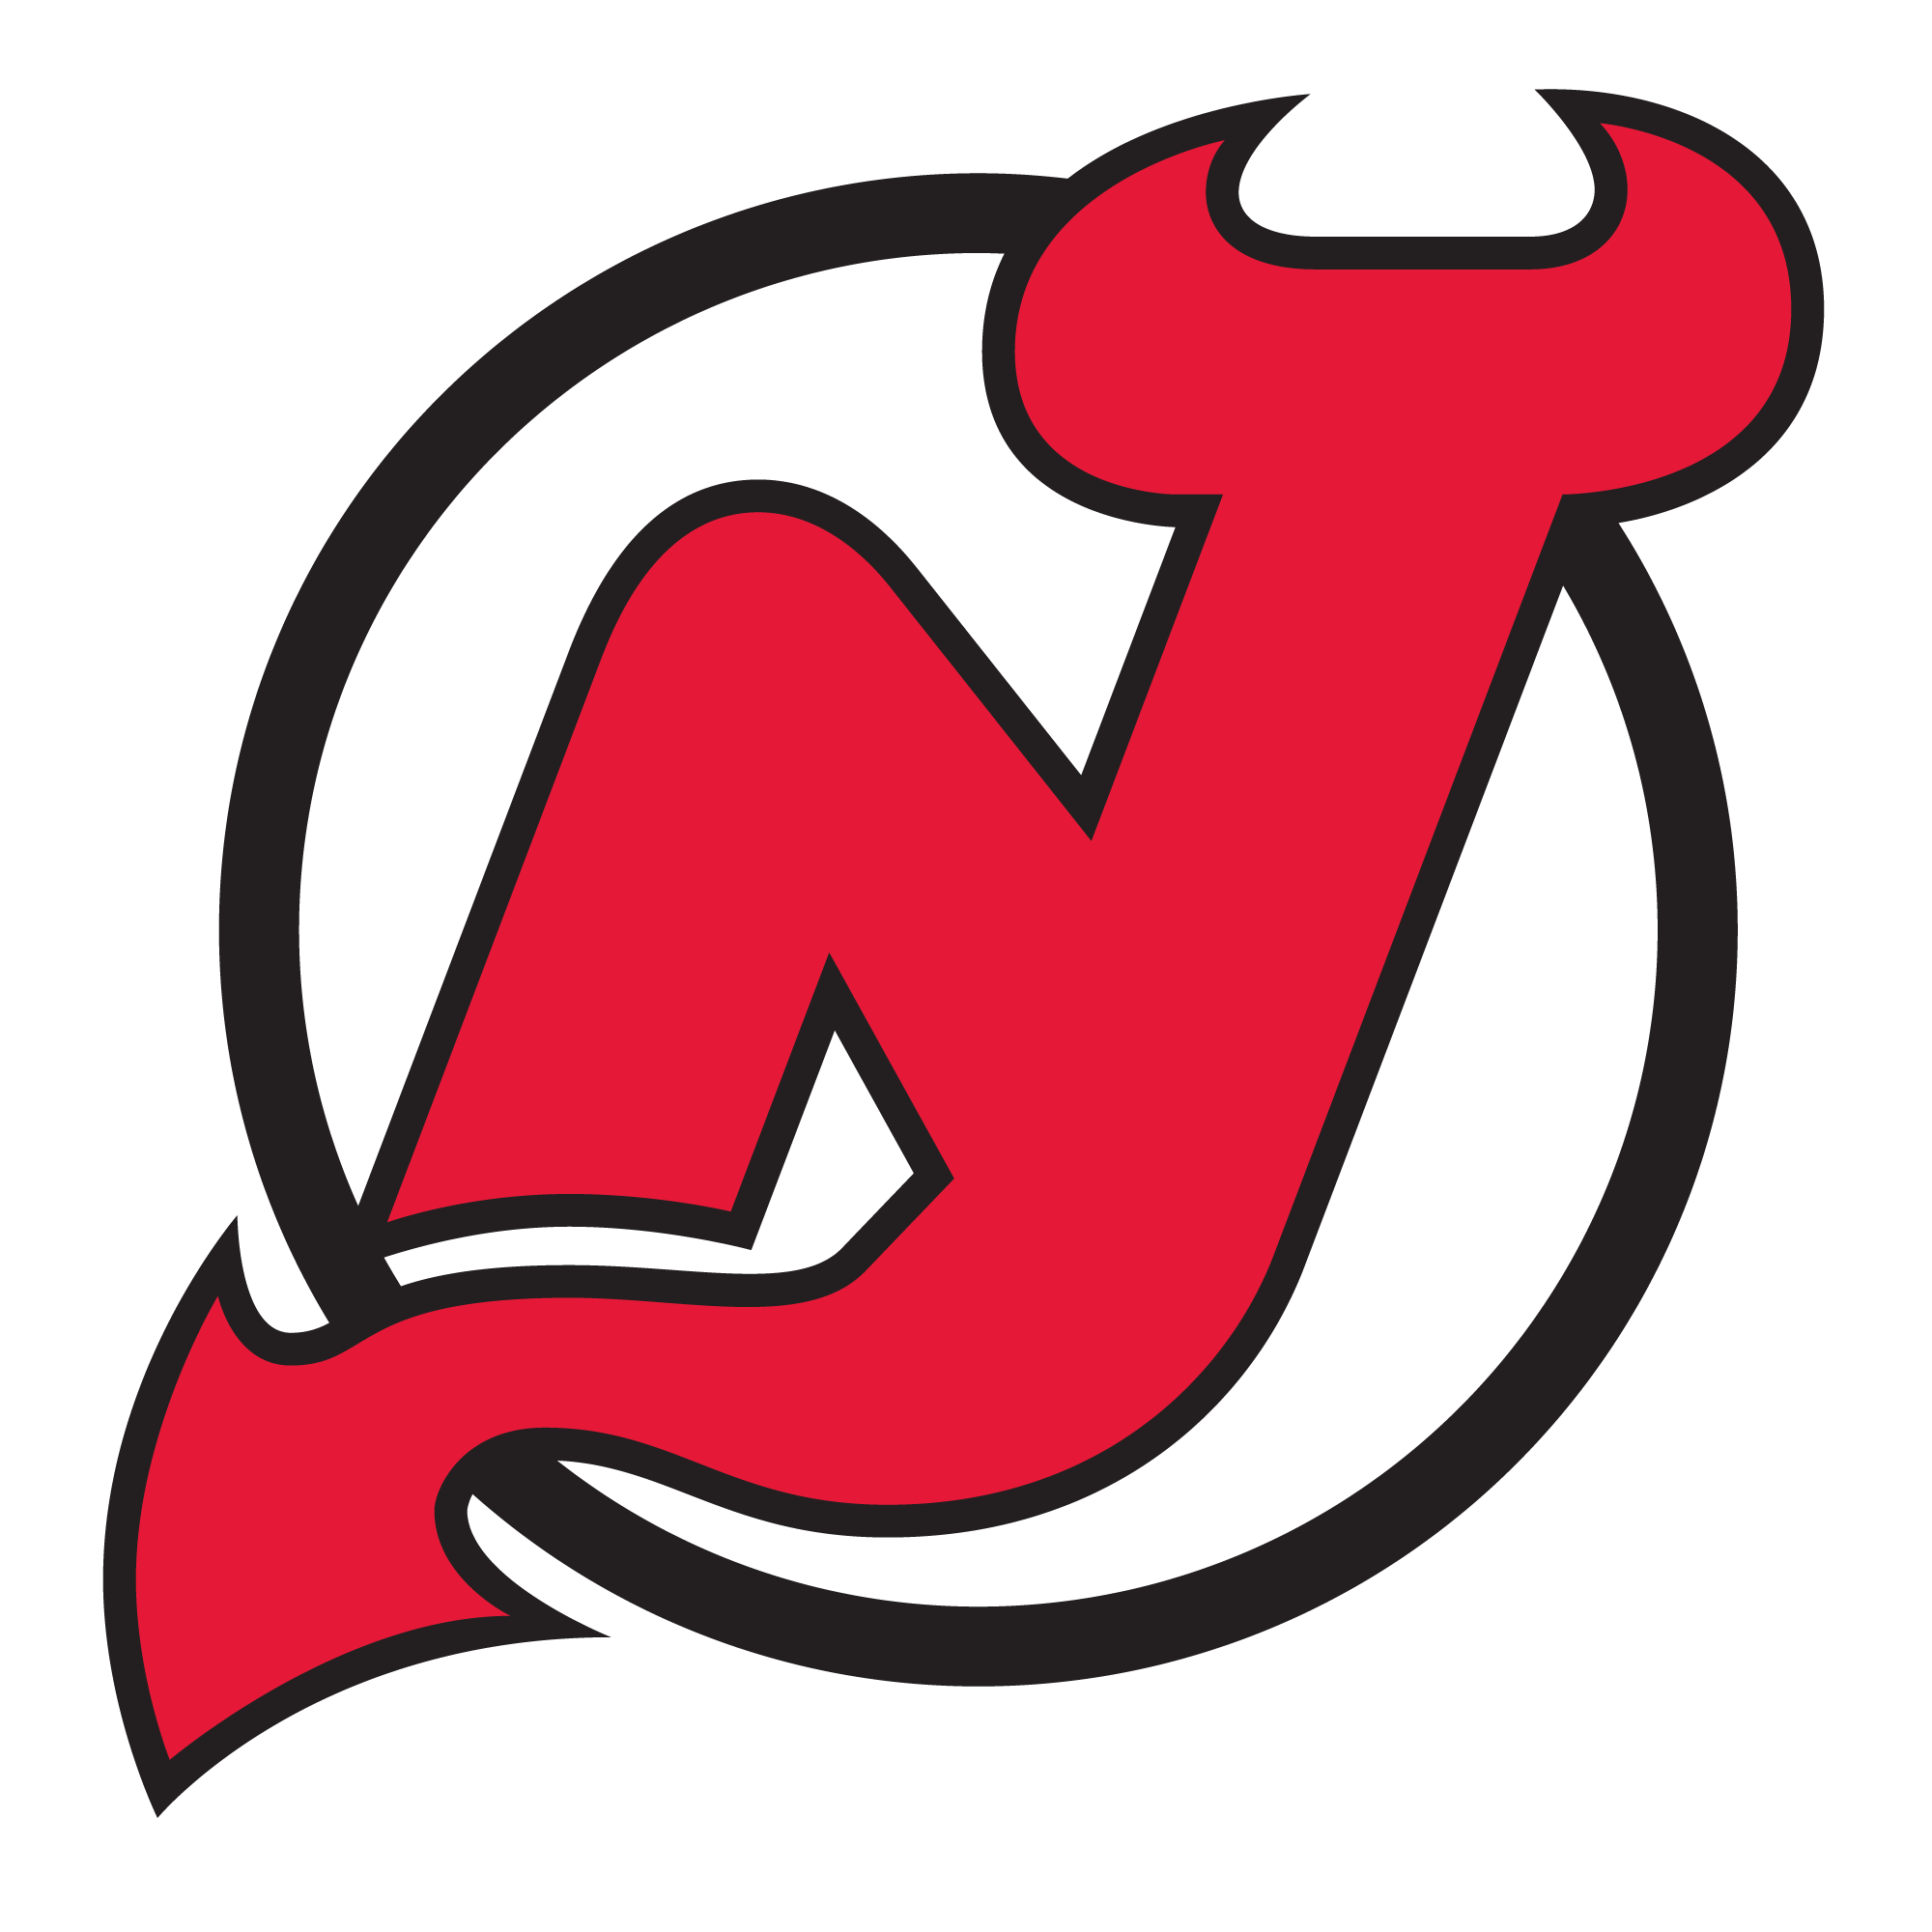 3 New Jersey Devils to blame for overtime loss to Arizona Coyotes